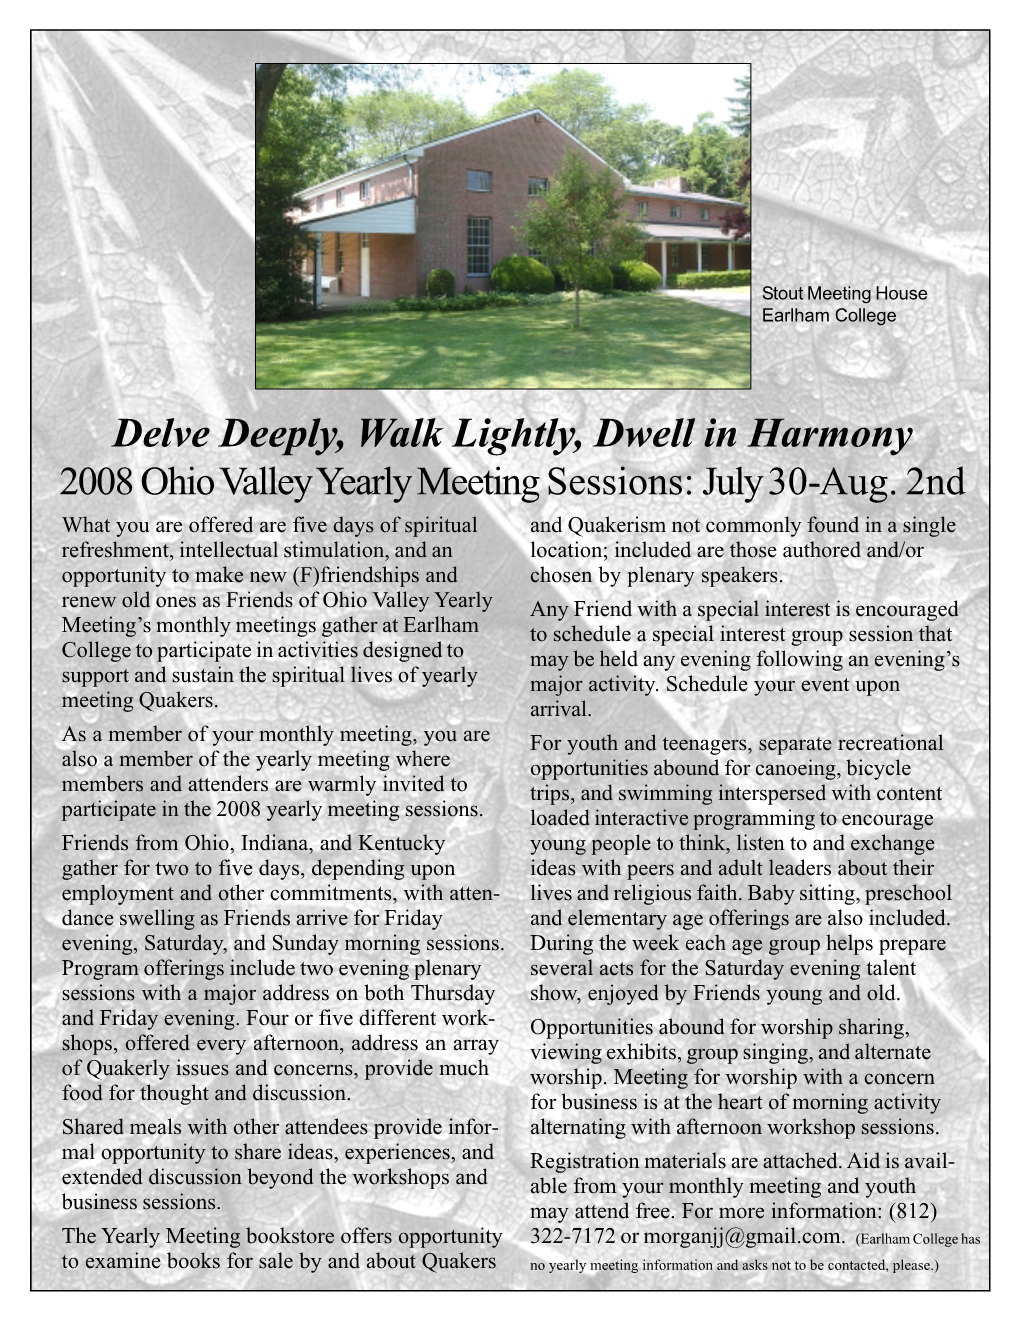 Delve Deeply, Walk Lightly, Dwell in Harmony 2008 Ohio Valley Yearly Meeting Sessions: July 30-Aug